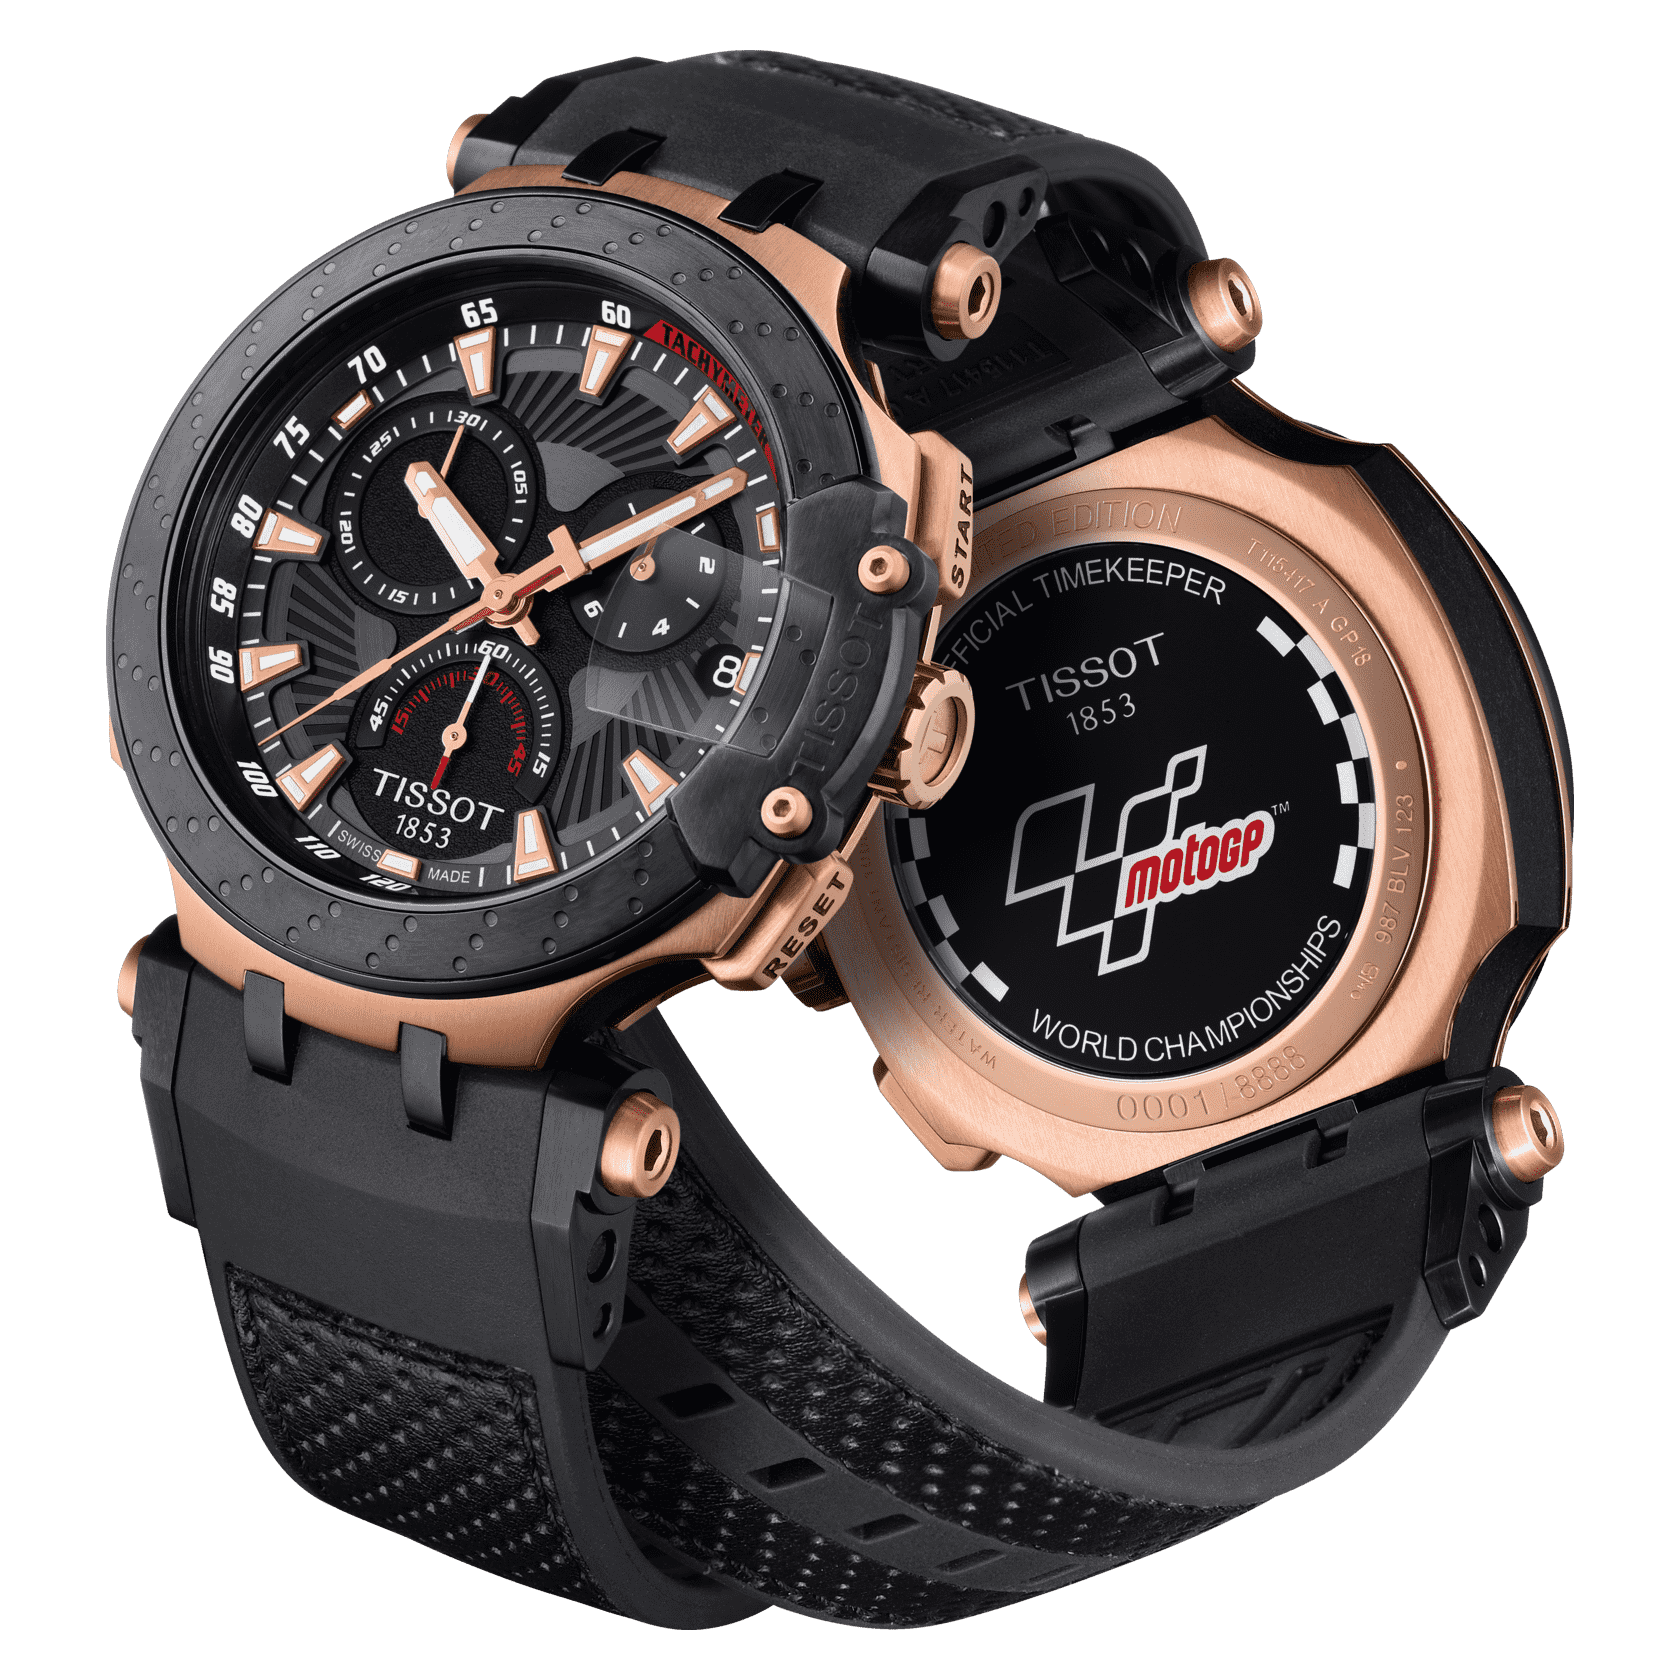 Best Quality Replica Watches Usa